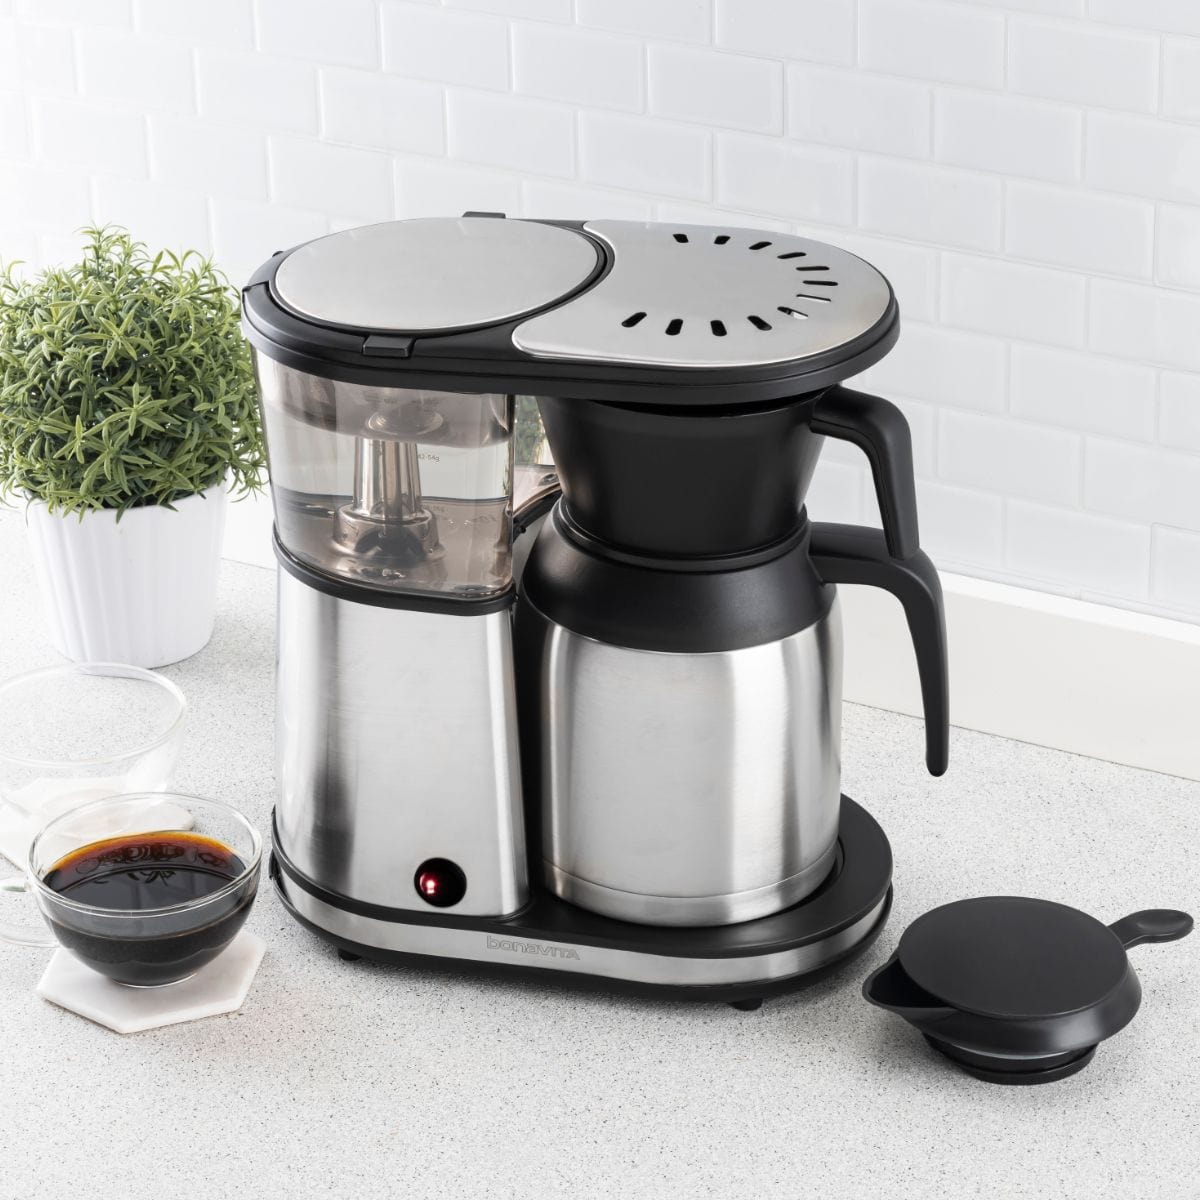 Bonavita 8-Cup One-Touch Black Stainless Steel Coffee Maker